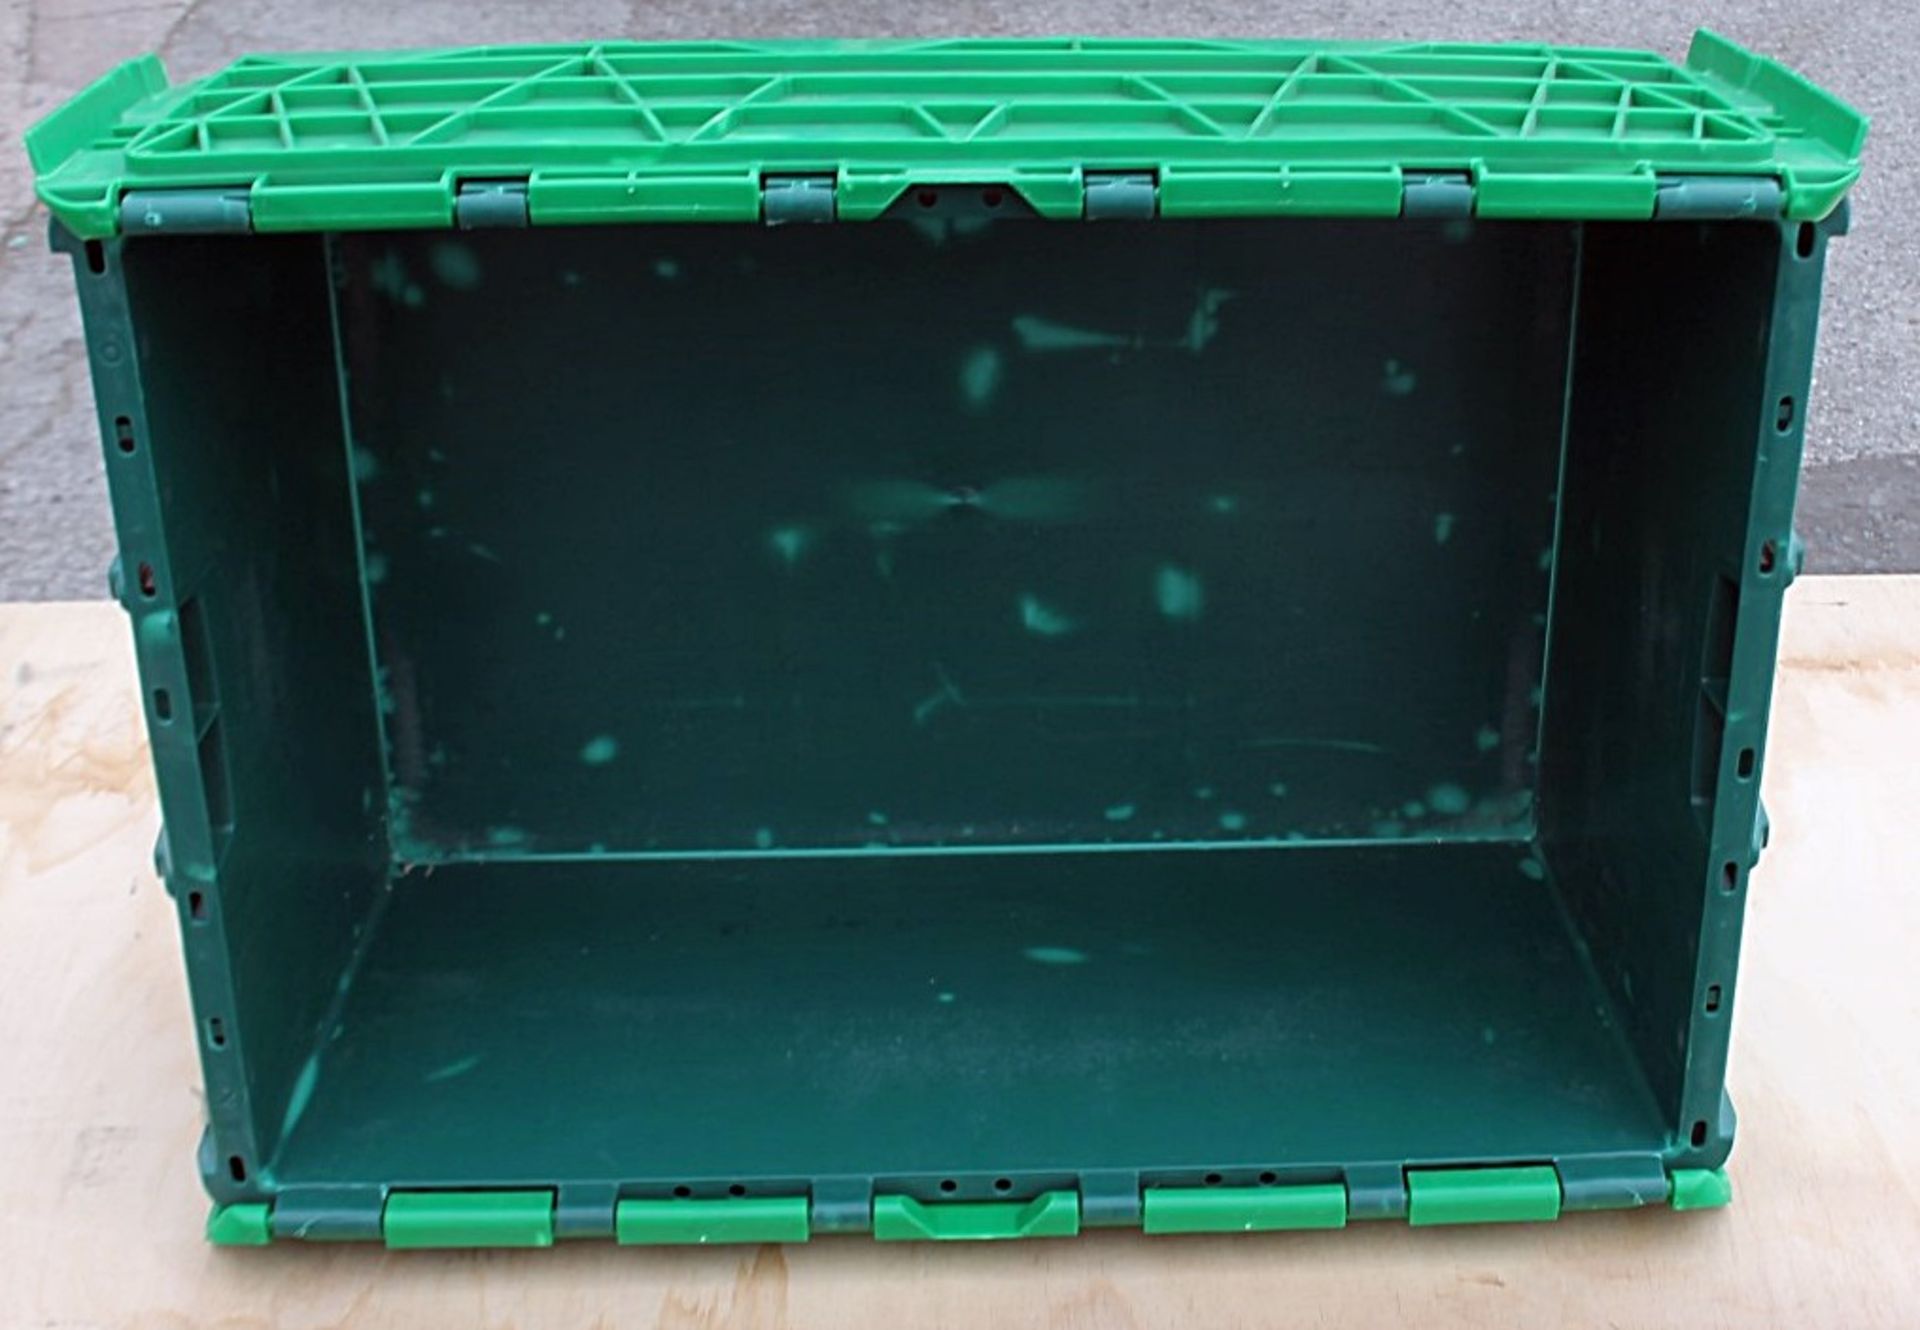 20 x Robust Low Profile Green Plastic Secure Storage Boxes With Attached Hinged Lids - Dimensions: - Image 2 of 6